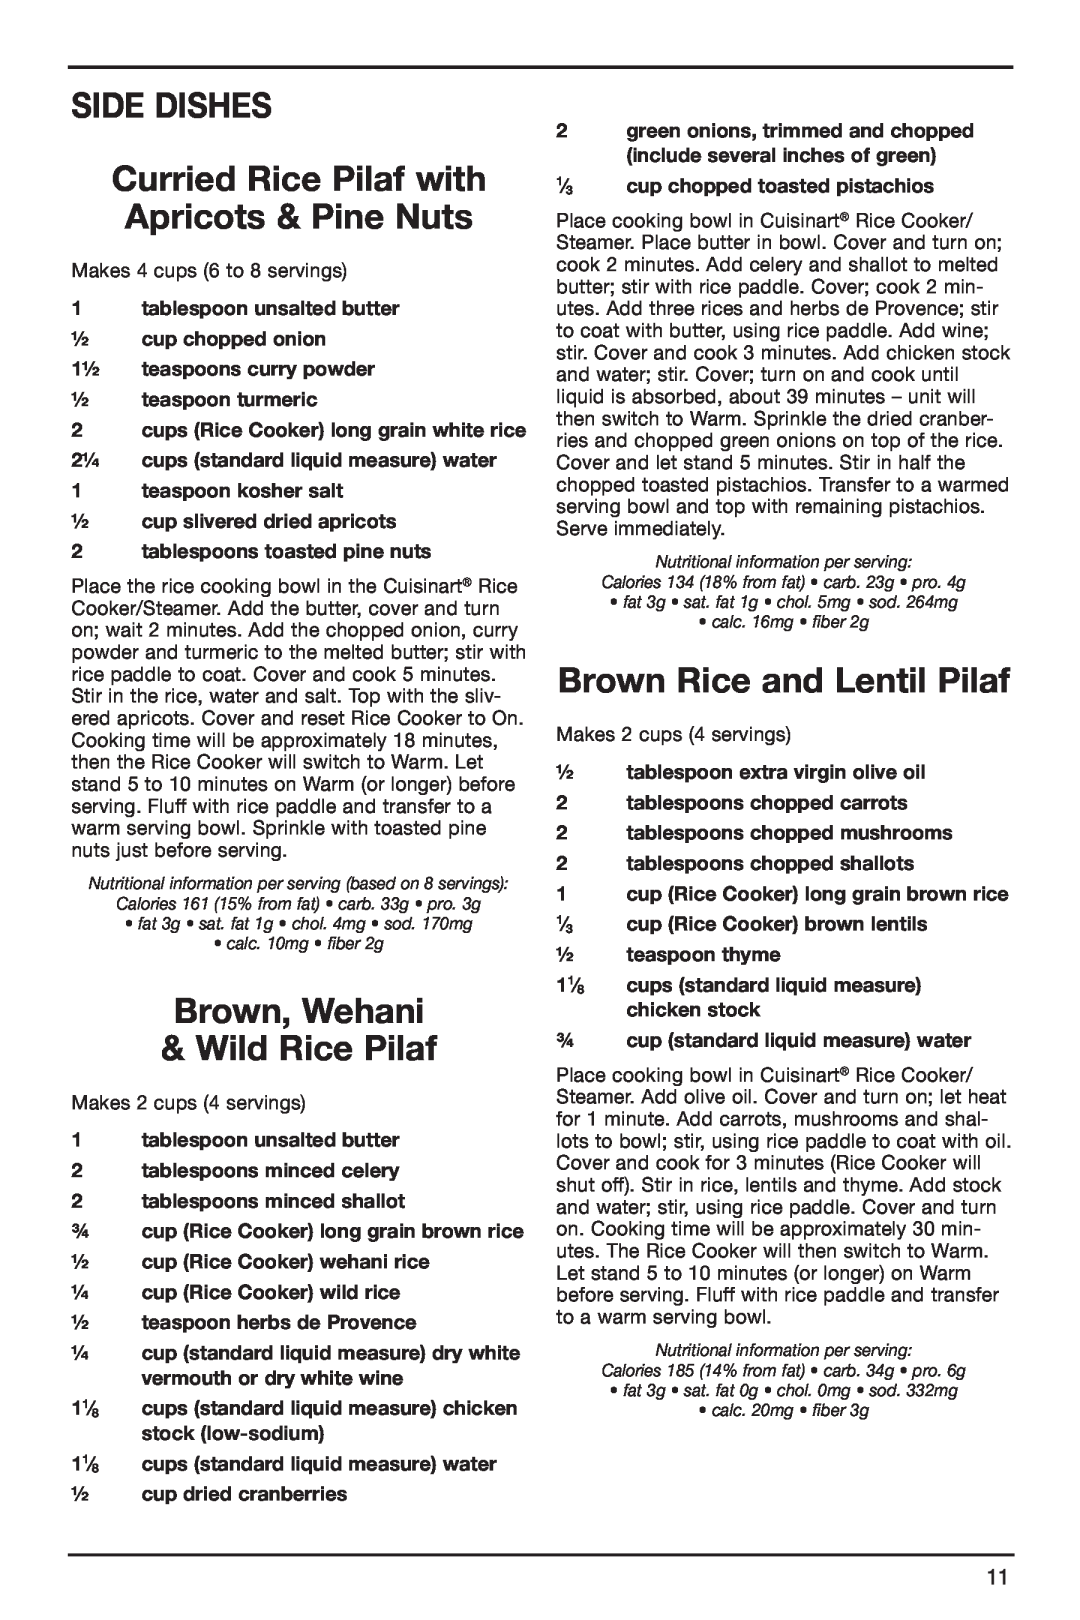 Cuisinart IB-4932B manual Side Dishes, Brown, Wehani & Wild Rice Pilaf, Brown Rice and Lentil Pilaf 